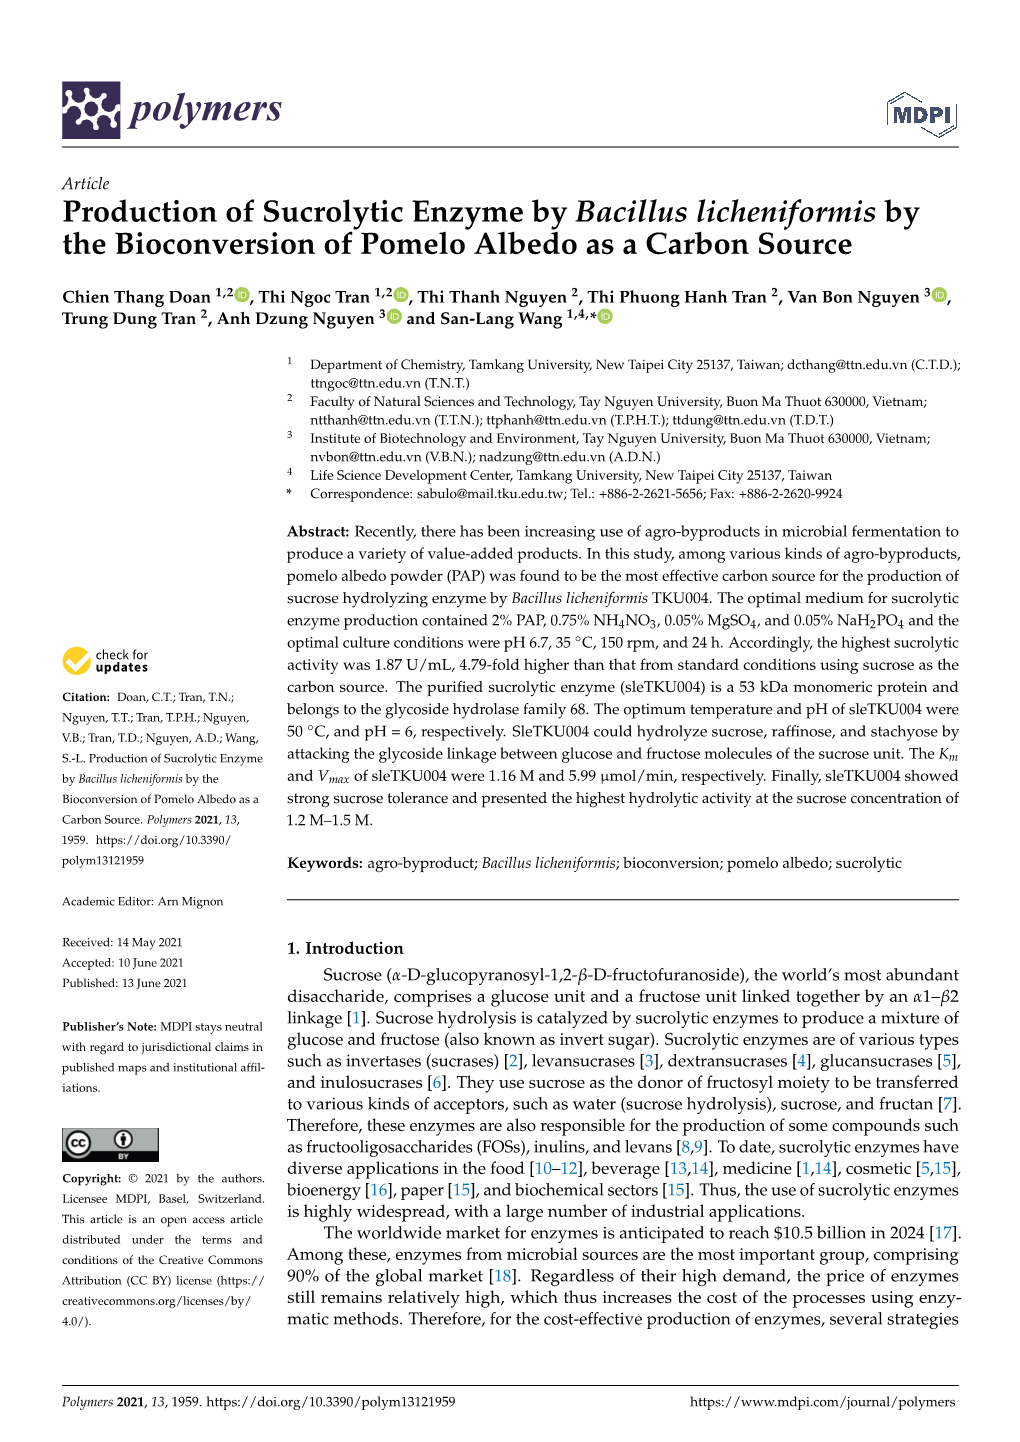 Production of Sucrolytic Enzyme by Bacillus Licheniformis by the Bioconversion of Pomelo Albedo As a Carbon Source